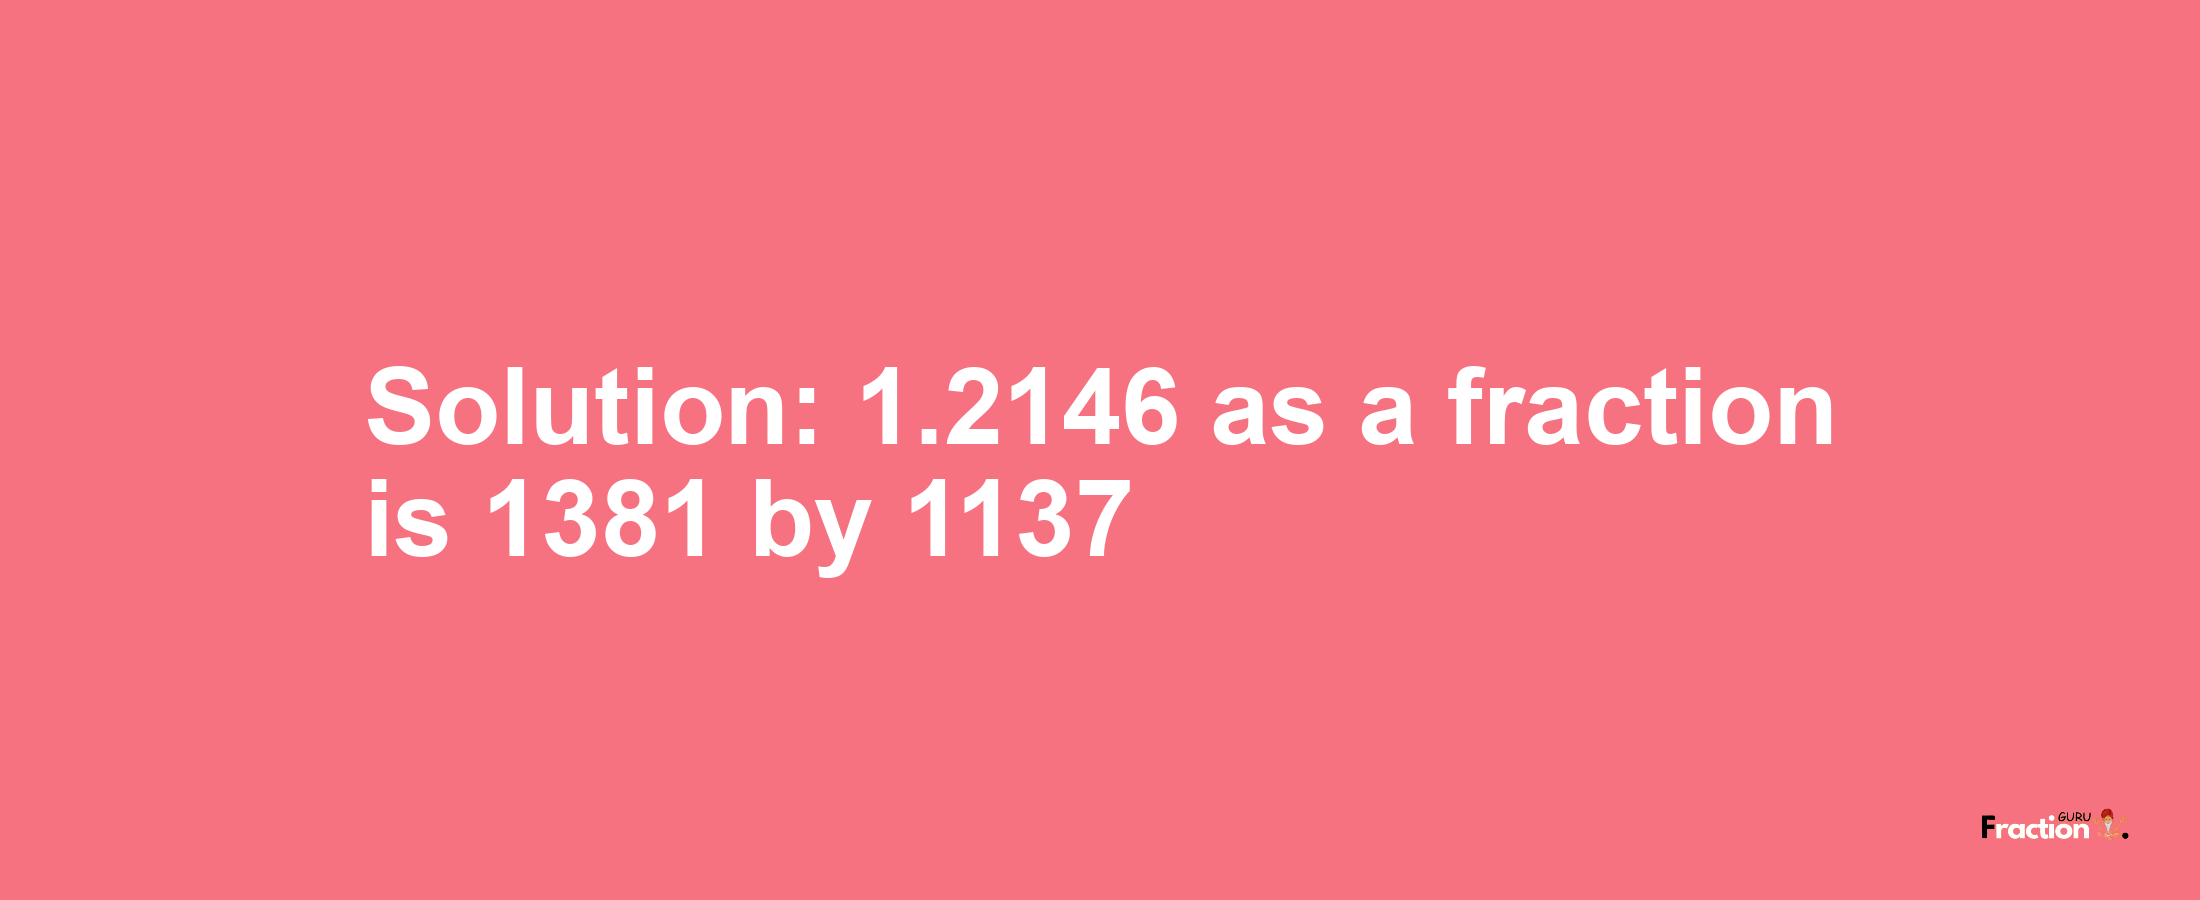 Solution:1.2146 as a fraction is 1381/1137